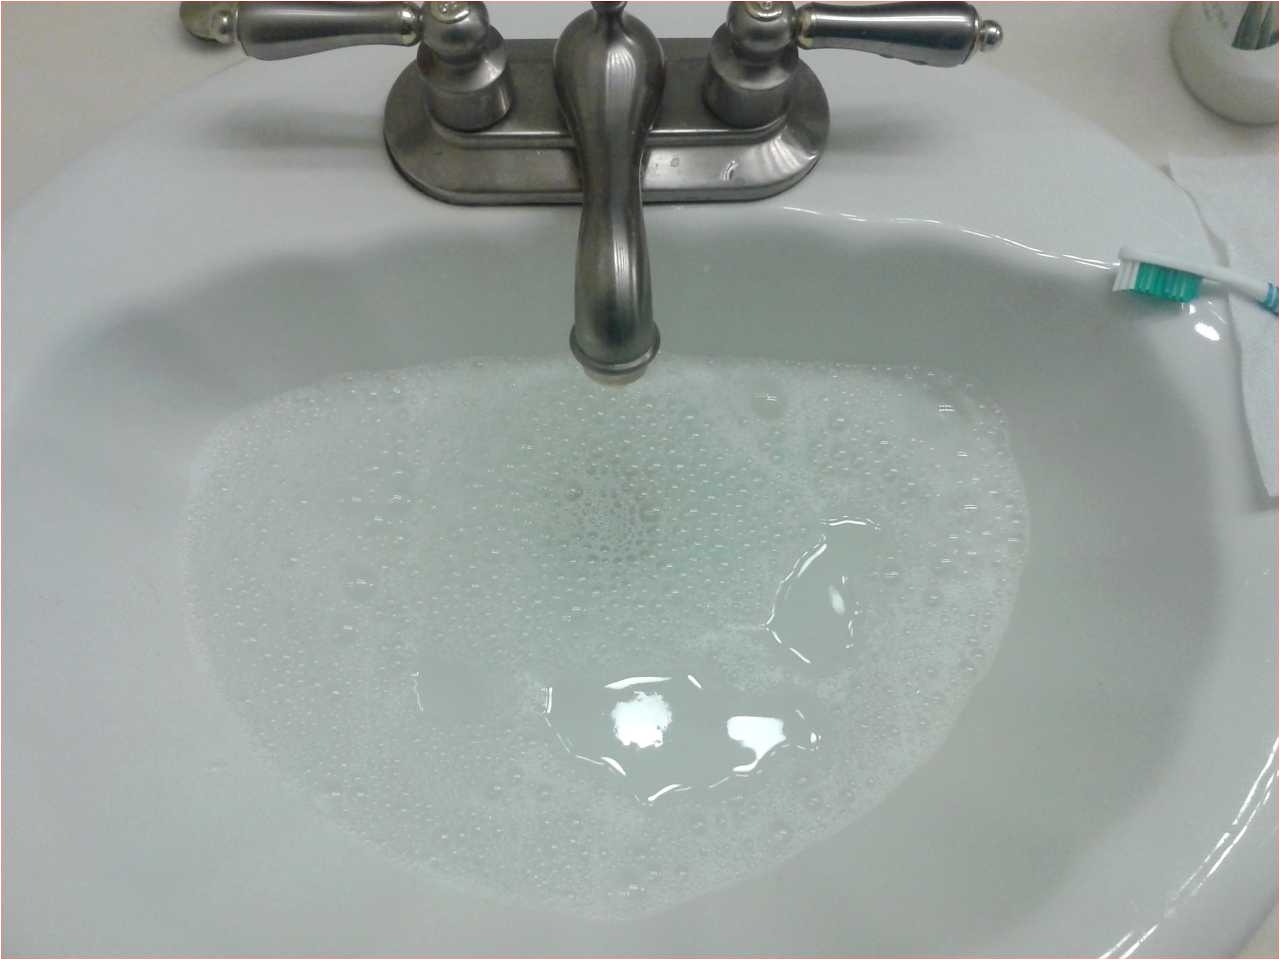 clogged bathtub drain lovely h sink how to fix a clogged bathroom drain quick remove of